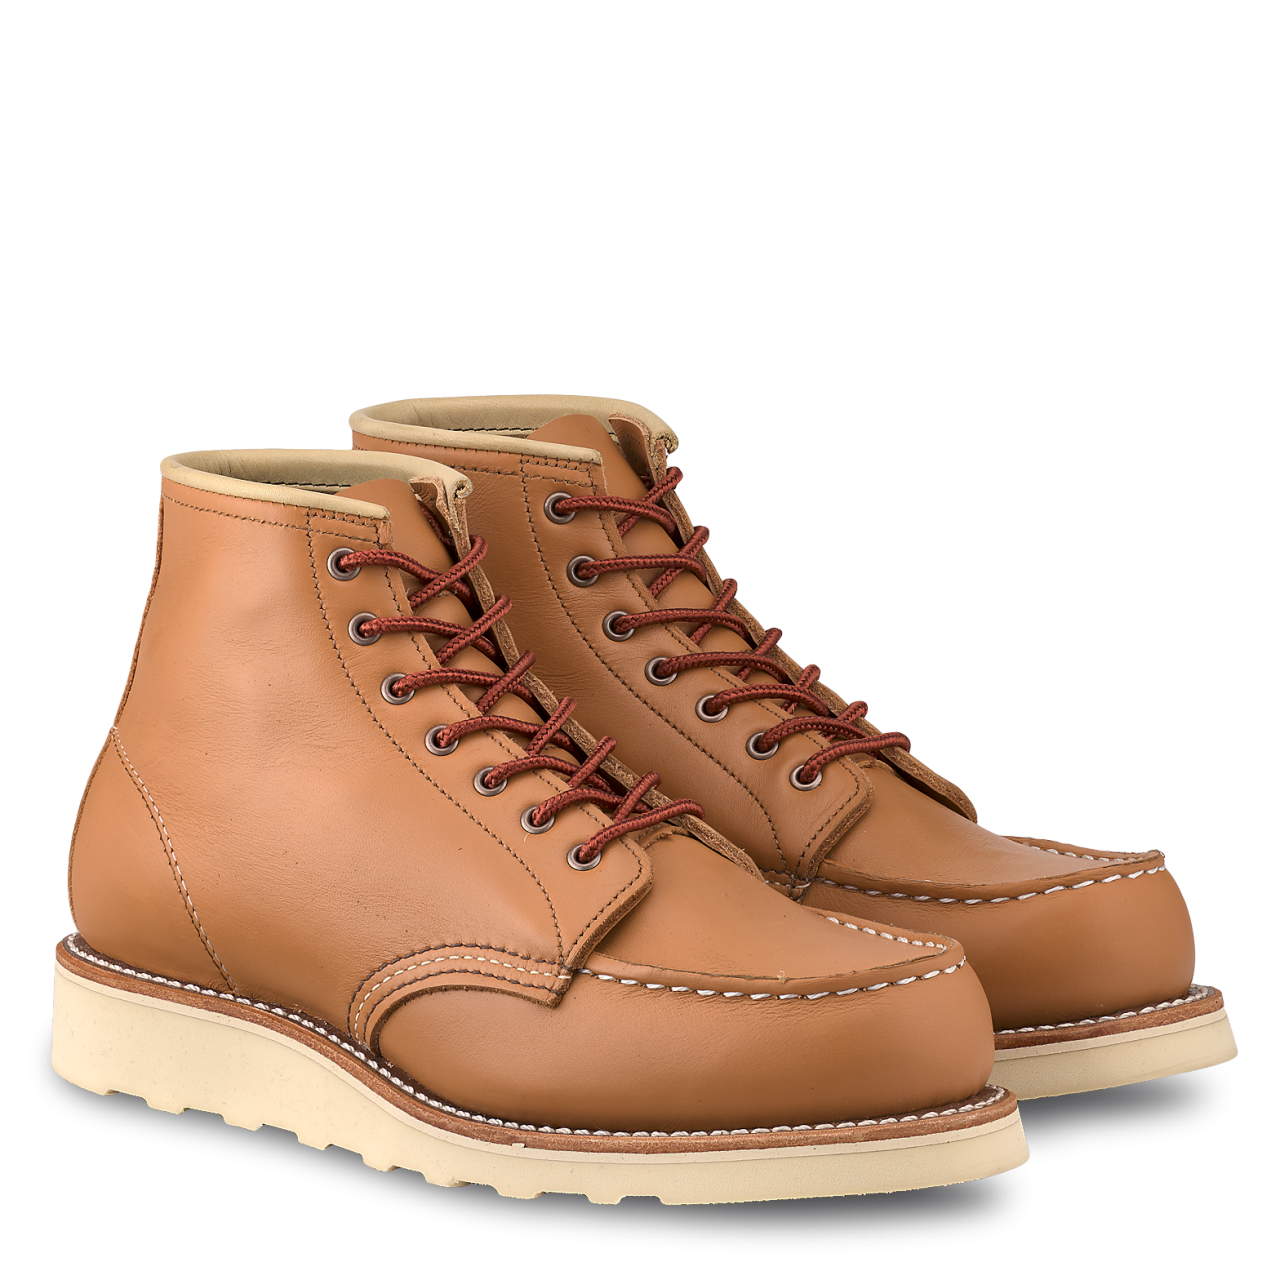 Red Wing 3383 Moc Toe